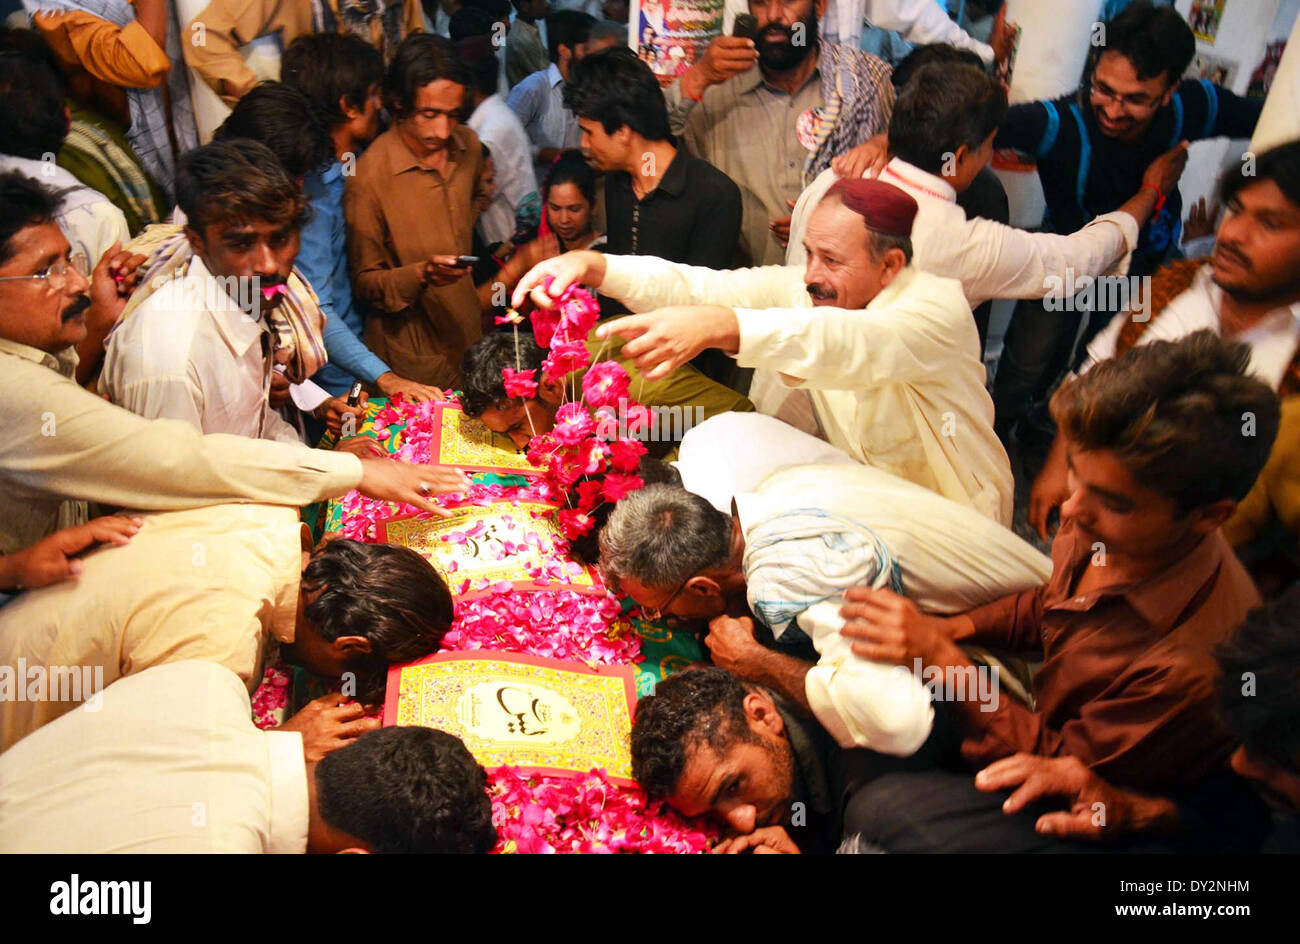 Bhutto devotees are showing their affection as they laying floral wreath on grave of Zulfiqar Ali Butto on the occasion of his 35th death anniversary held in Garhi Khuda Bux on Friday, April 04, 2014. Credit:  Asianet-Pakistan/Alamy Live News Stock Photo